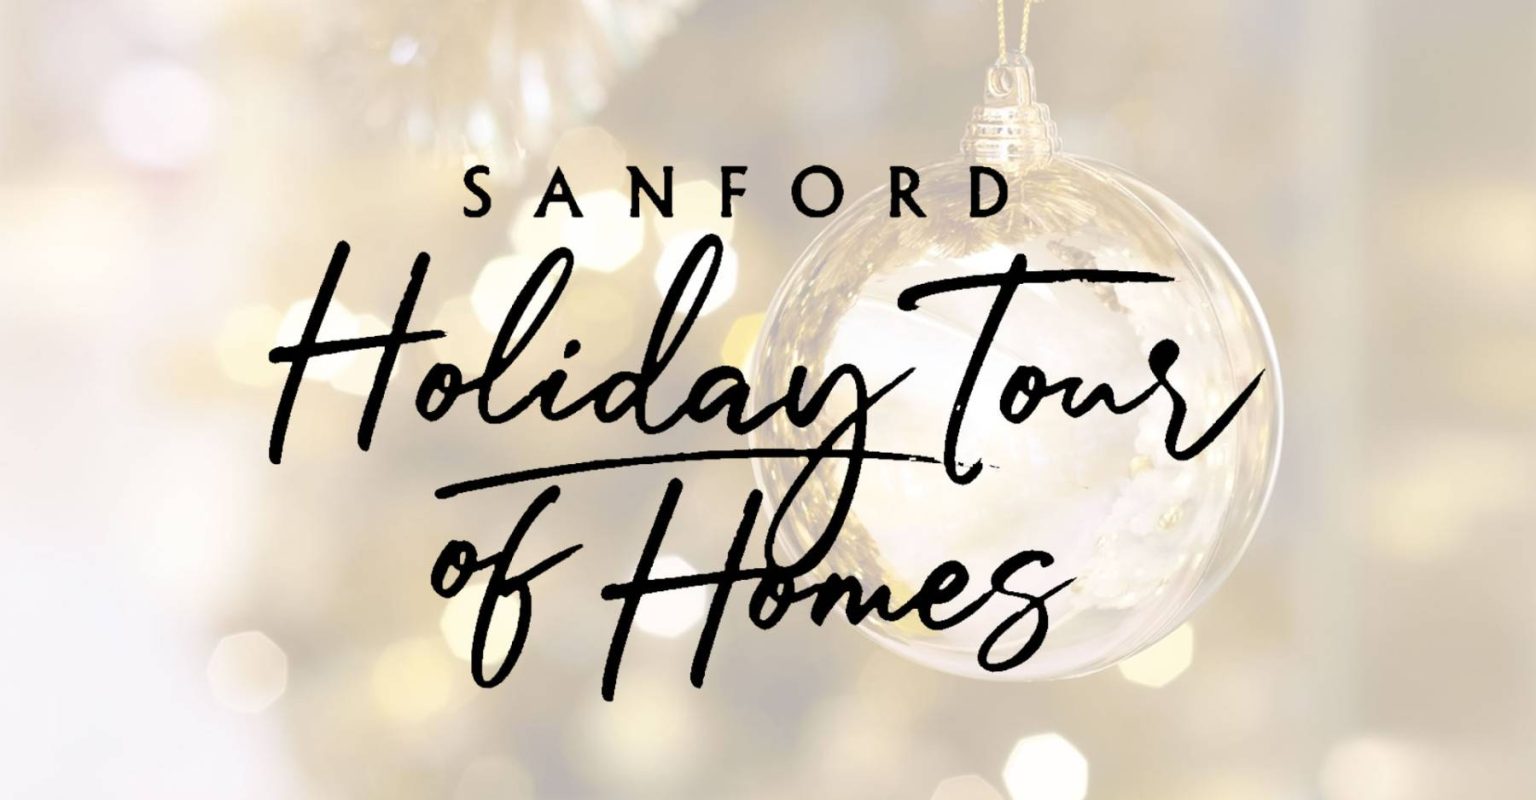 34th Annual Sanford Holiday Tour of Homes Historic Downtown Sanford